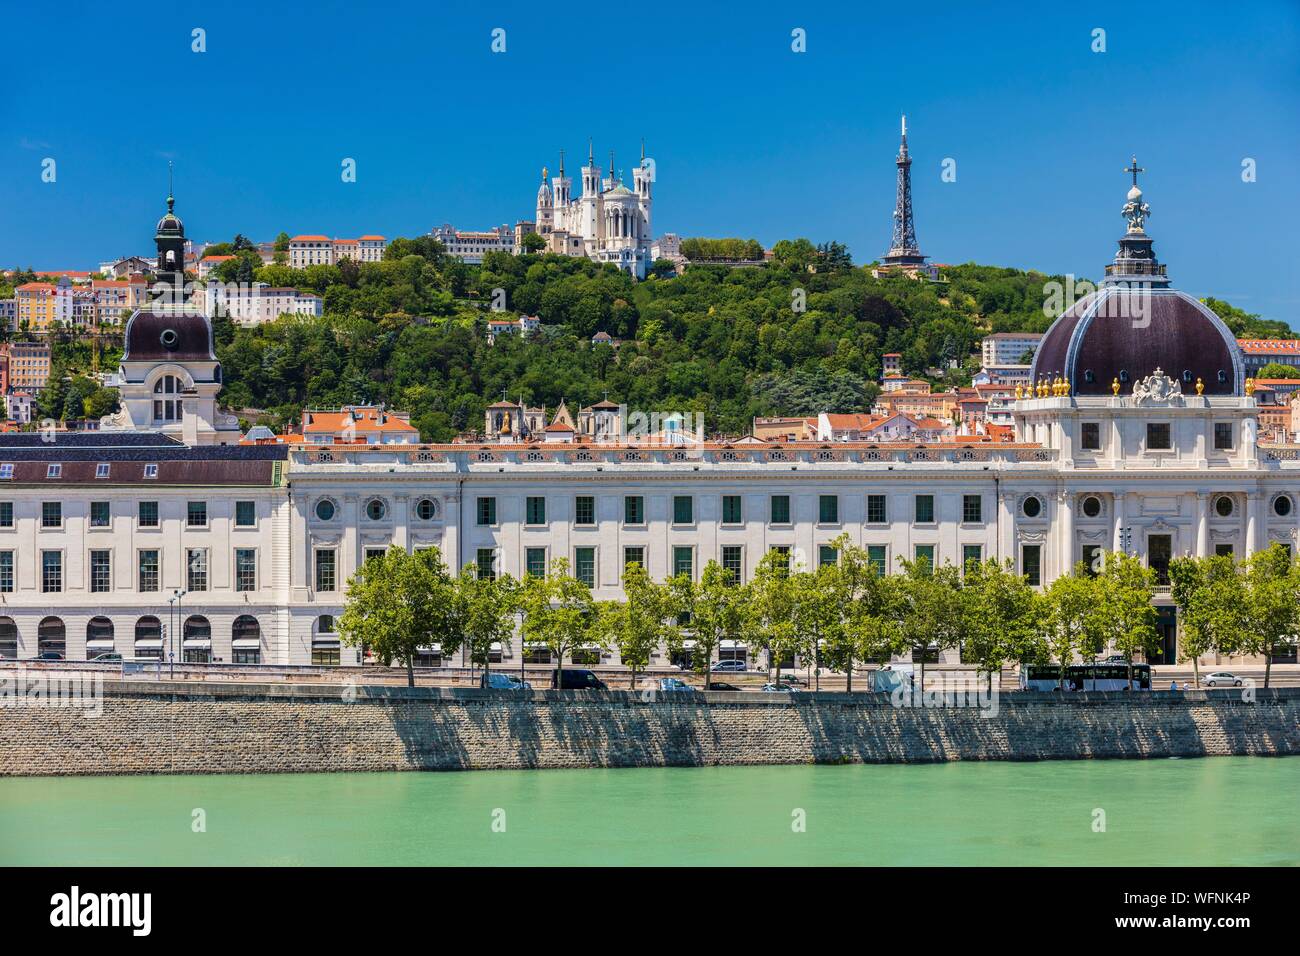 France, Rhone, Lyon, historical site listed as World Heritage by UNESCO, Rhone River banks with a view of the Hotel Dieu and Notre Dame de Fourviere Basilica Stock Photo